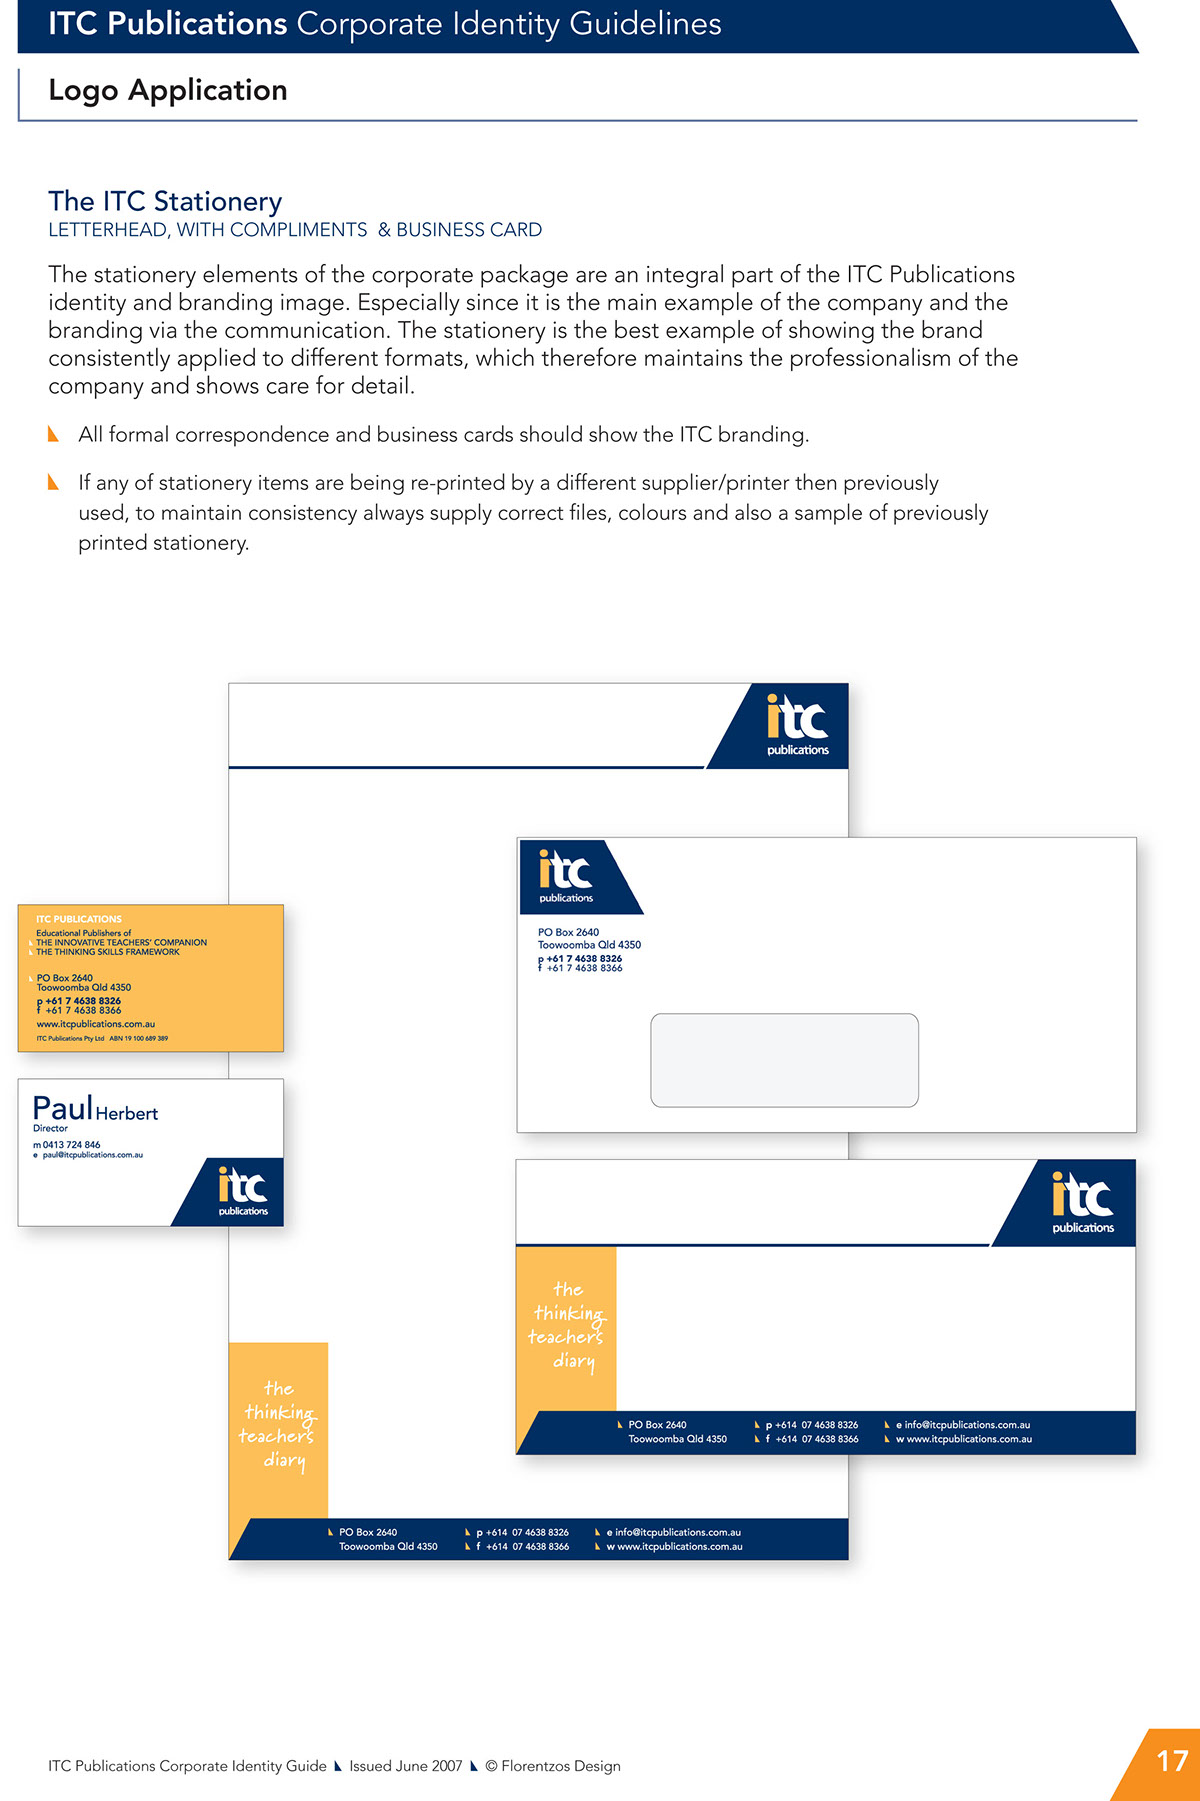 ITC ITC Publication Education Digital Systems brand guidelines